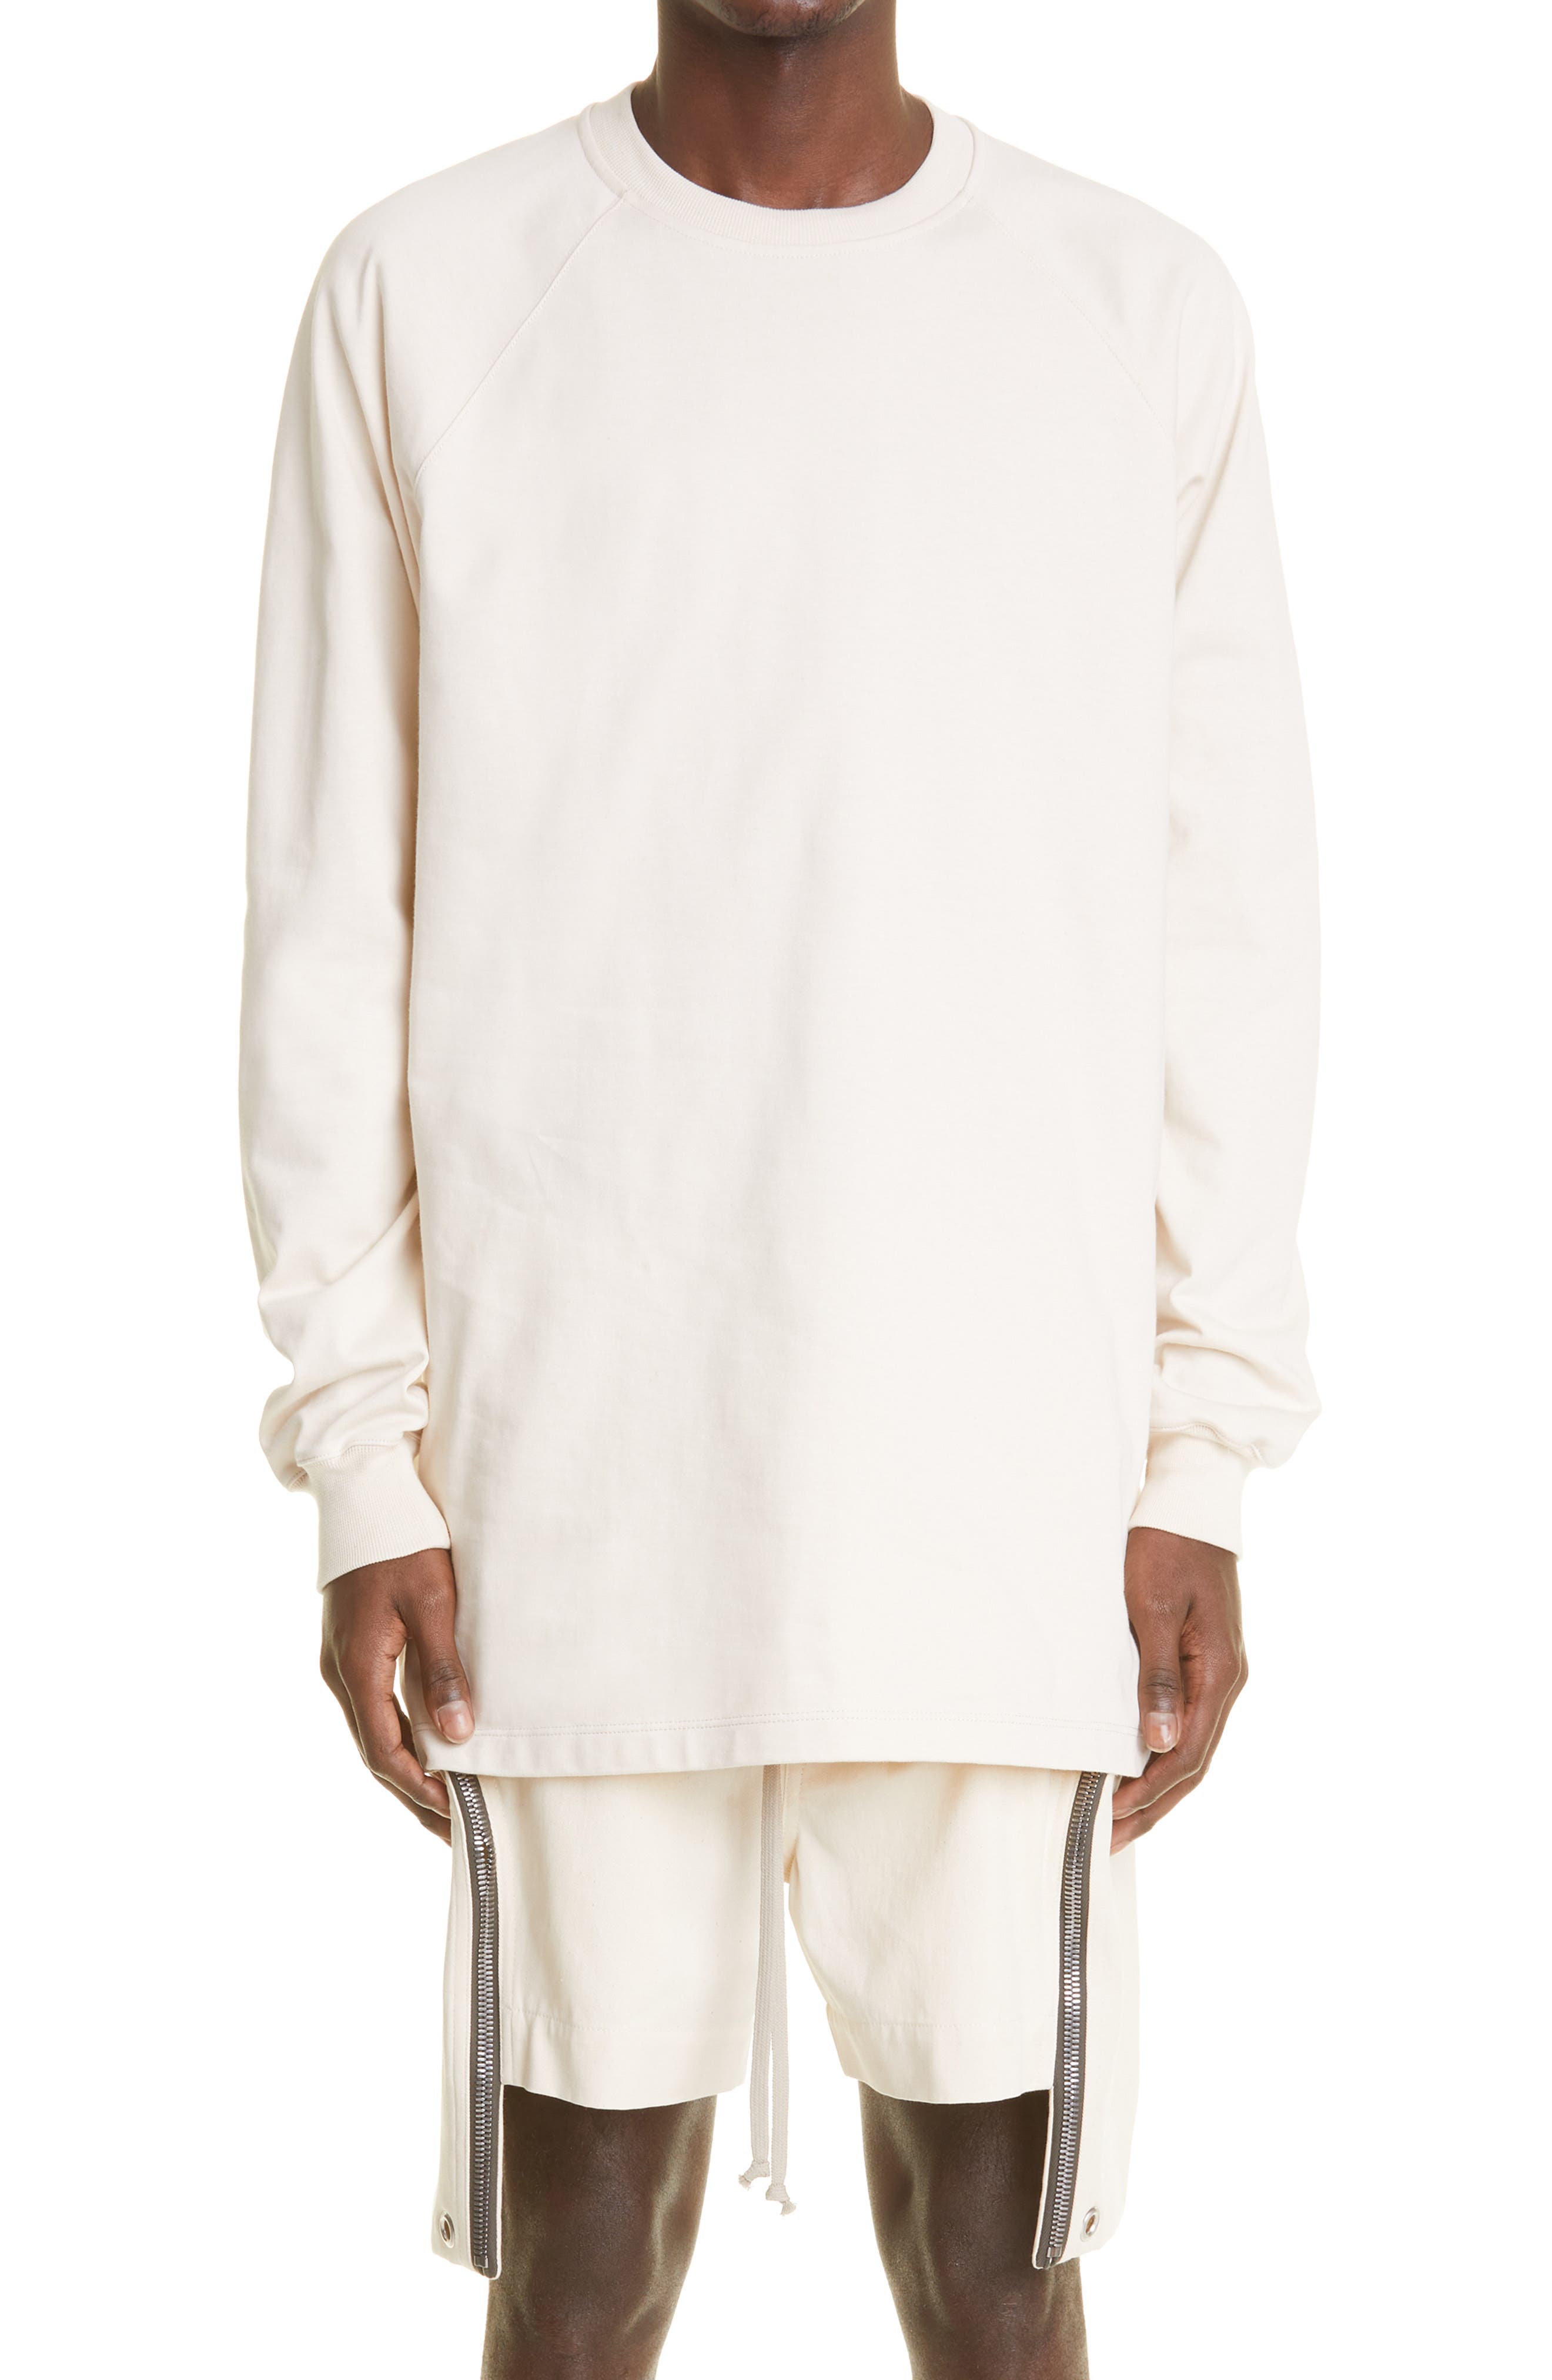 Rick Owens Oversize Cotton Baseball T-Shirt in Natural at Nordstrom, Size X-Small